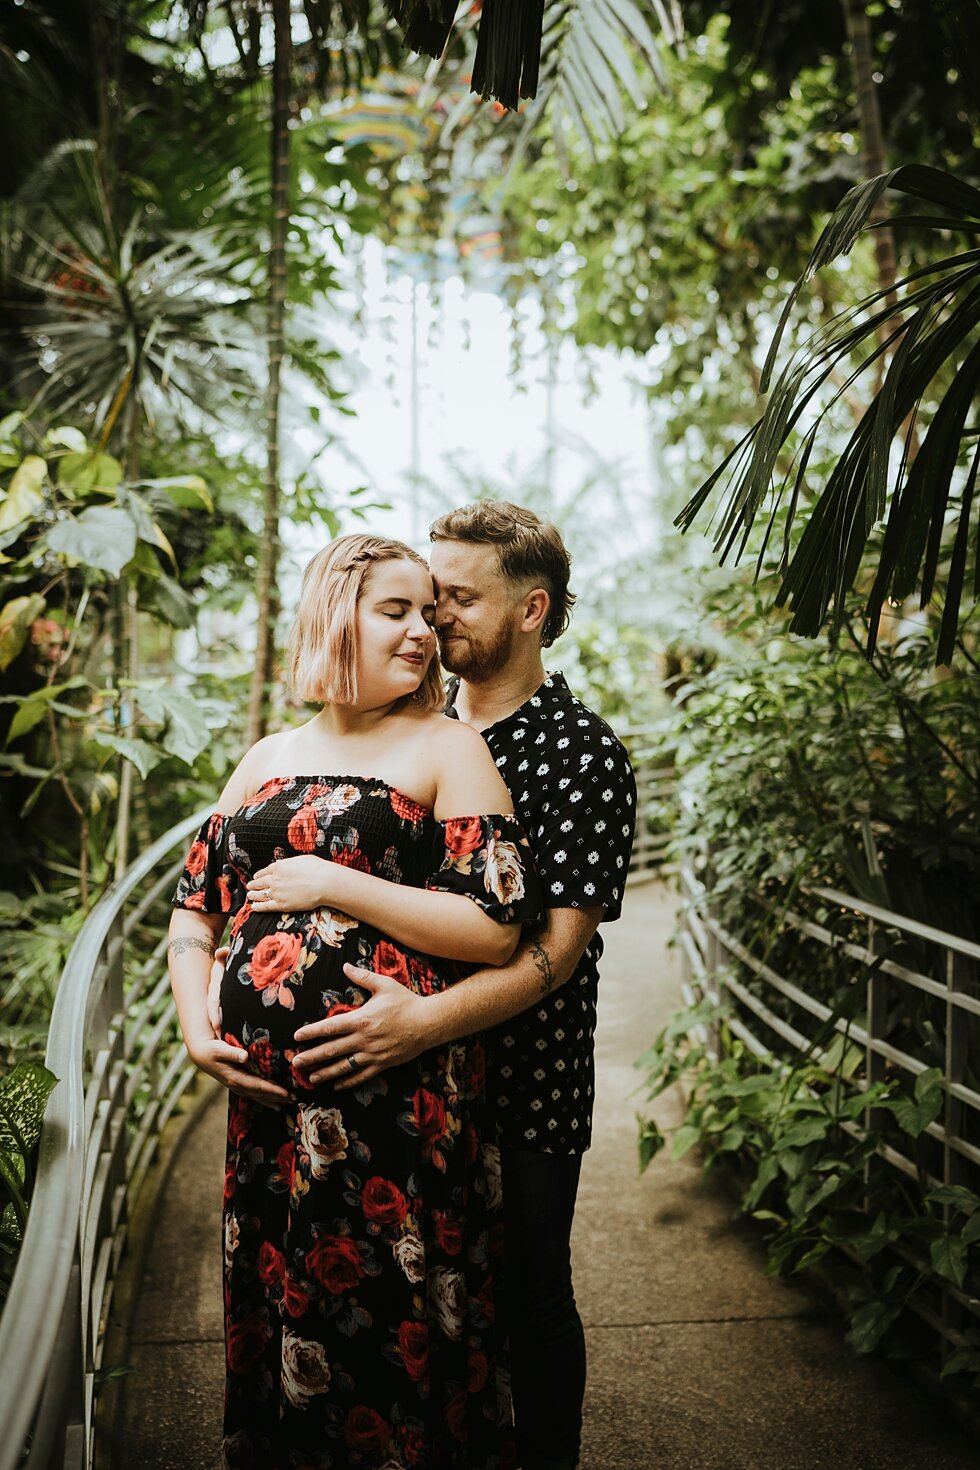  Expecting mom and dad craddling their growing baby at Krohn Conservatory #maternitygoals #maternityphotographer #babybump #outdoorphotosession #kentuckyphotographer #indianaphotographer #louisvillephotographer #maternityphotos #expectingababy #mirac